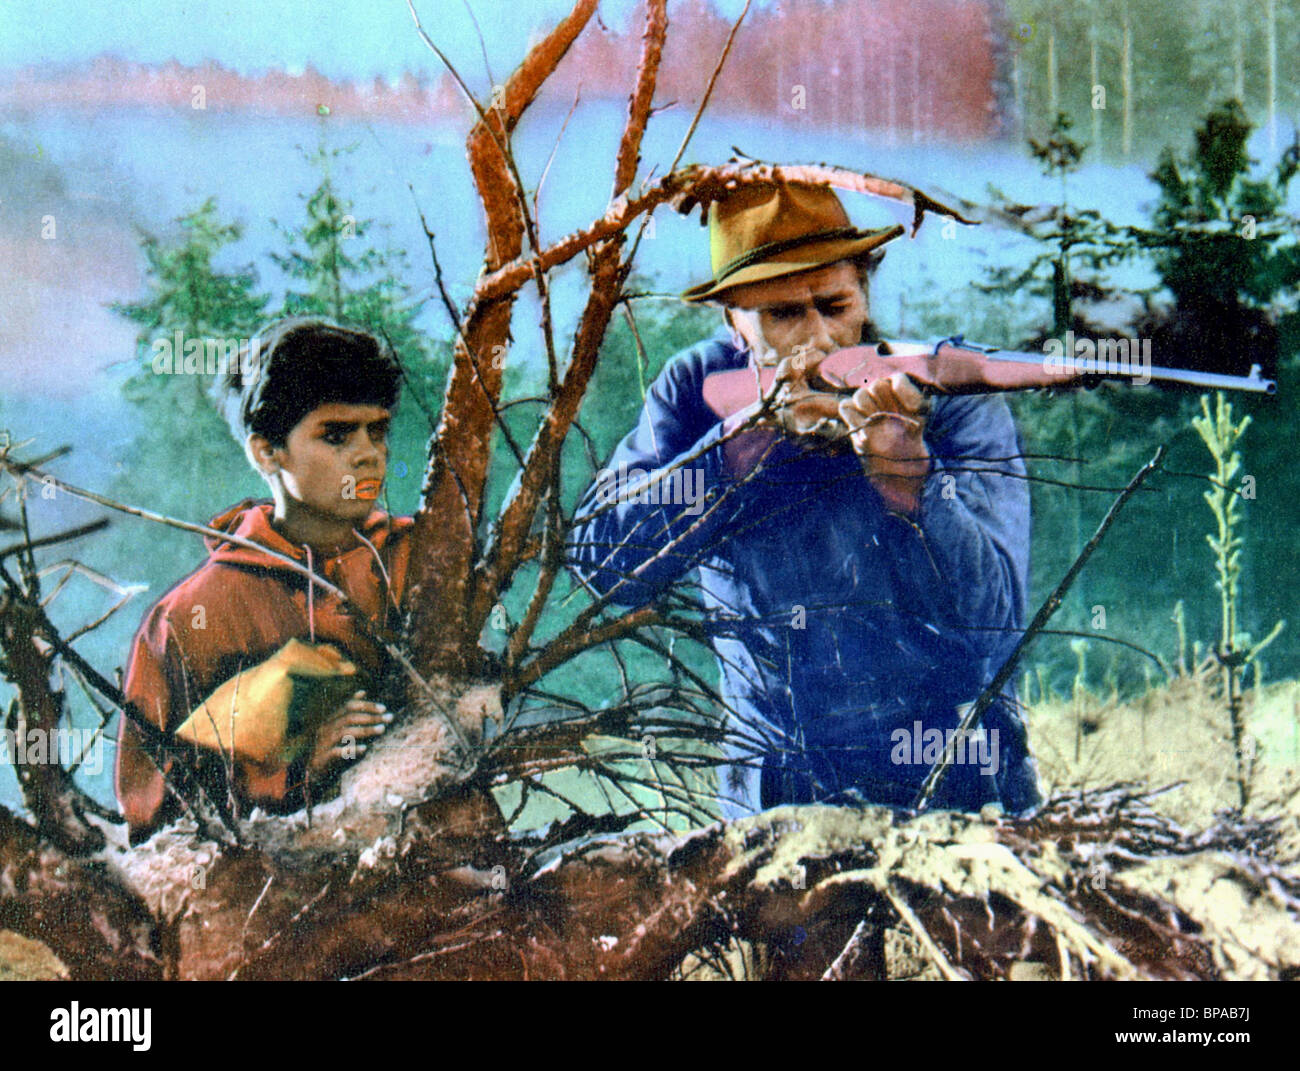 EDVIN ADOLPHSON, JIMMY STERMAN, BOY OF TWO WORLDS, 1959 Stock Photo - Alamy